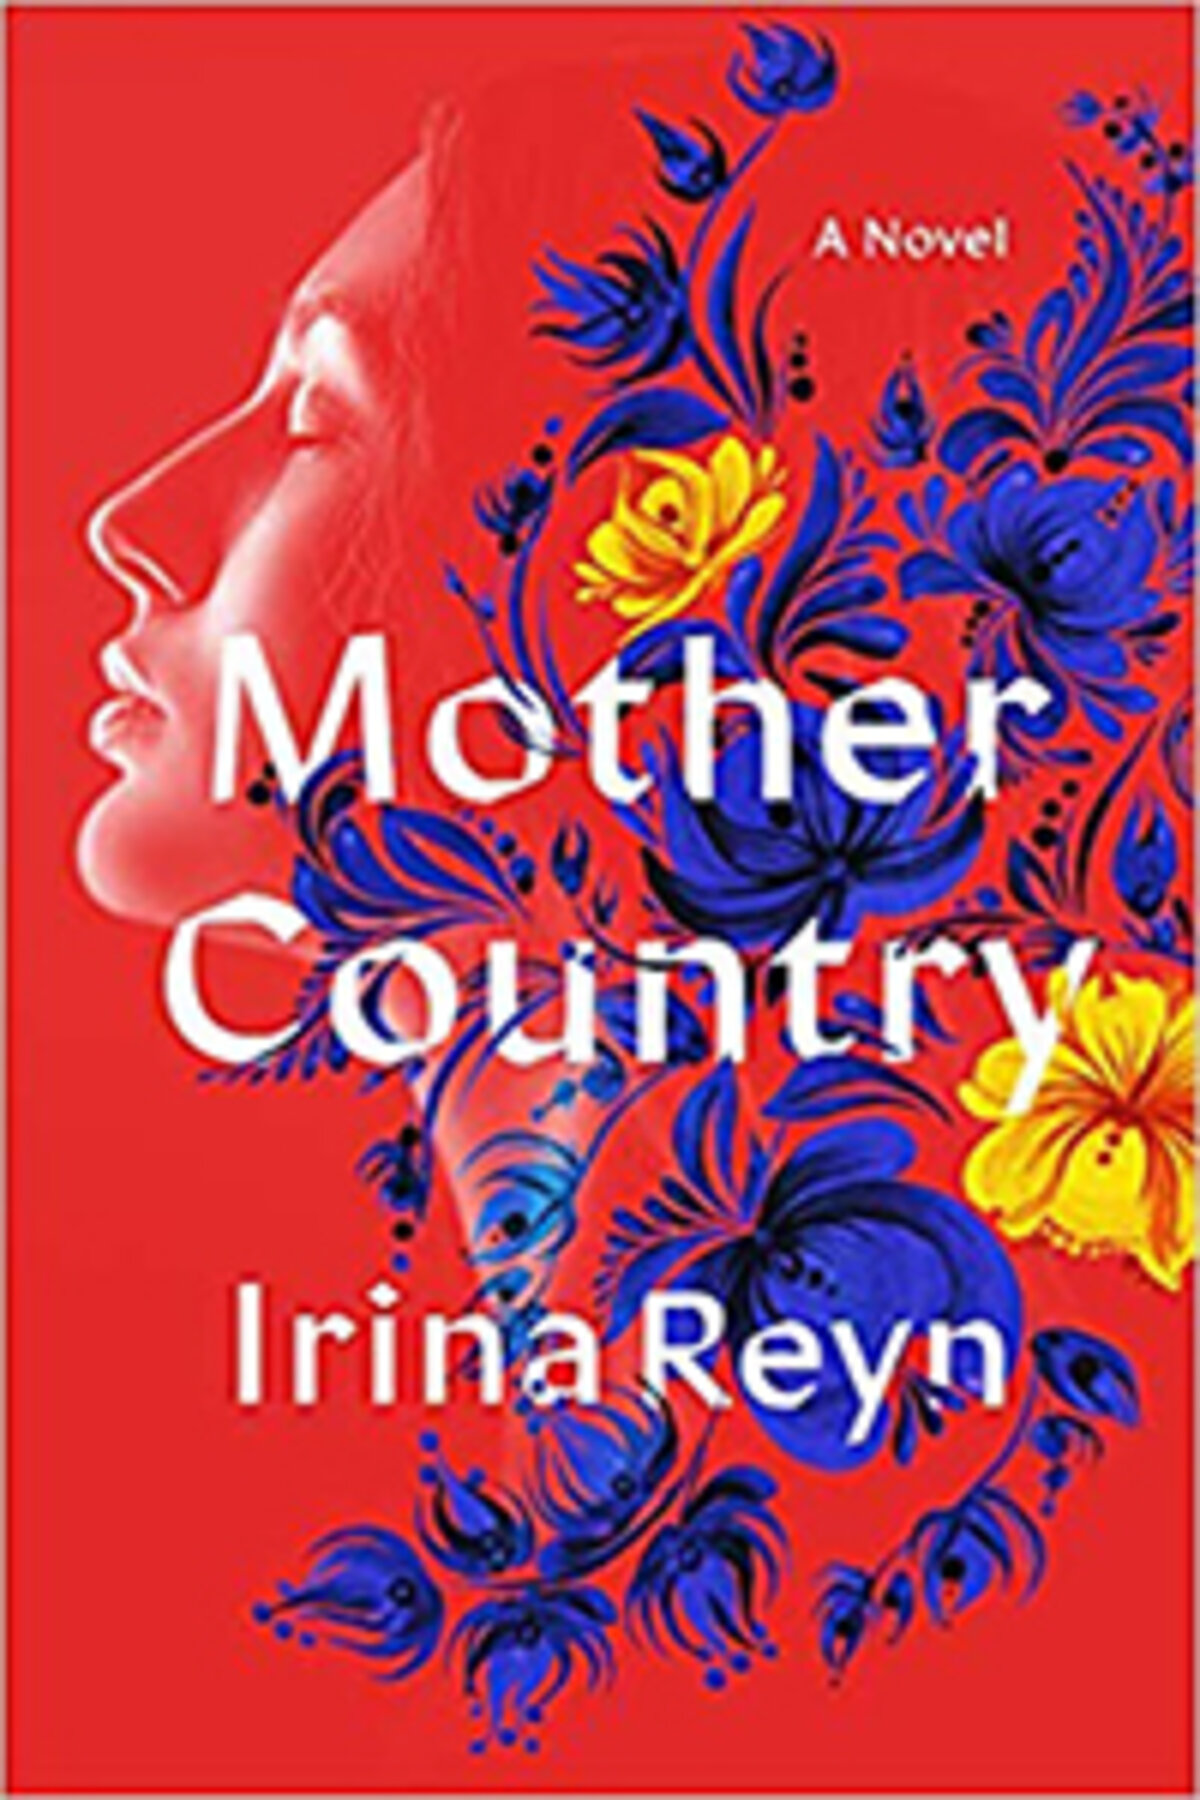 Profile of person with bouquet of flowers on book cover of Mother Country by Irina Reyn